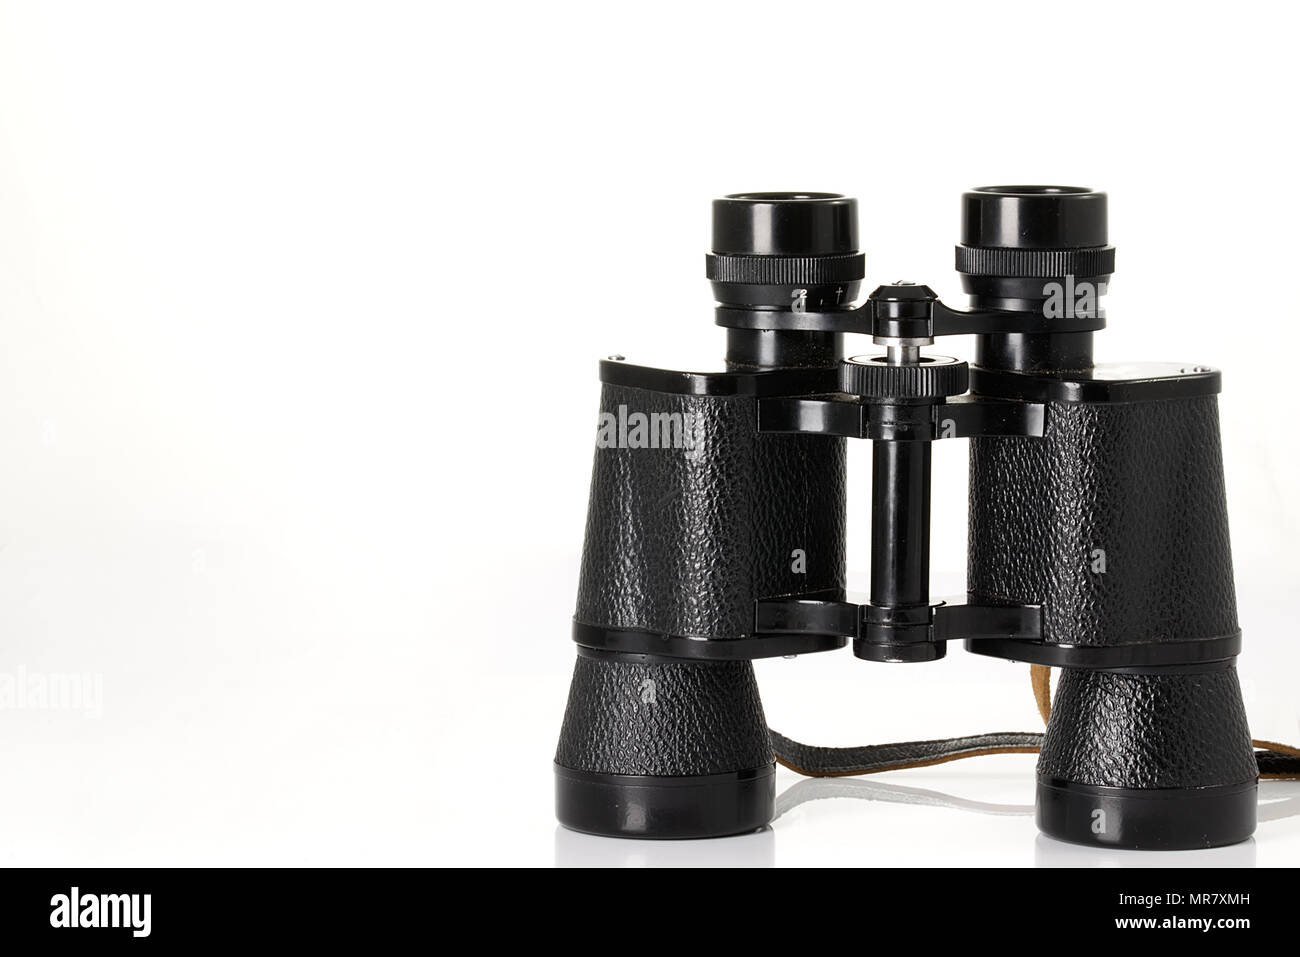 Retro binoculars (field glasses) isolated on a white background. Stock Photo